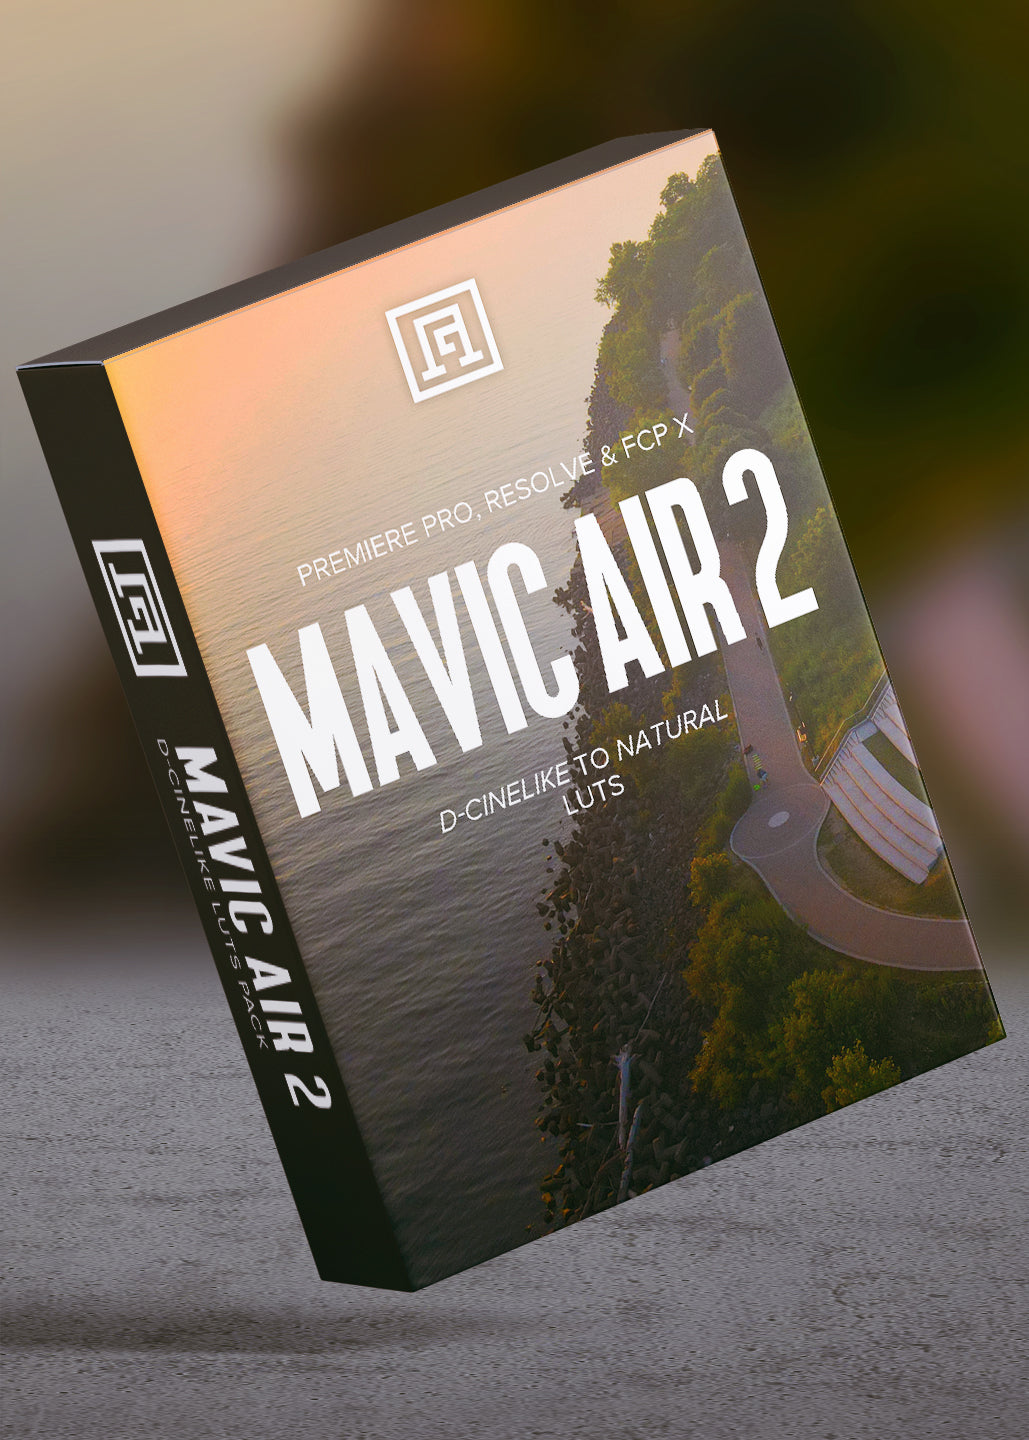 Mavic Air 2 D-Cinelike LUTs | Convert D-Cinelike to Natural-looking Footage for Grading